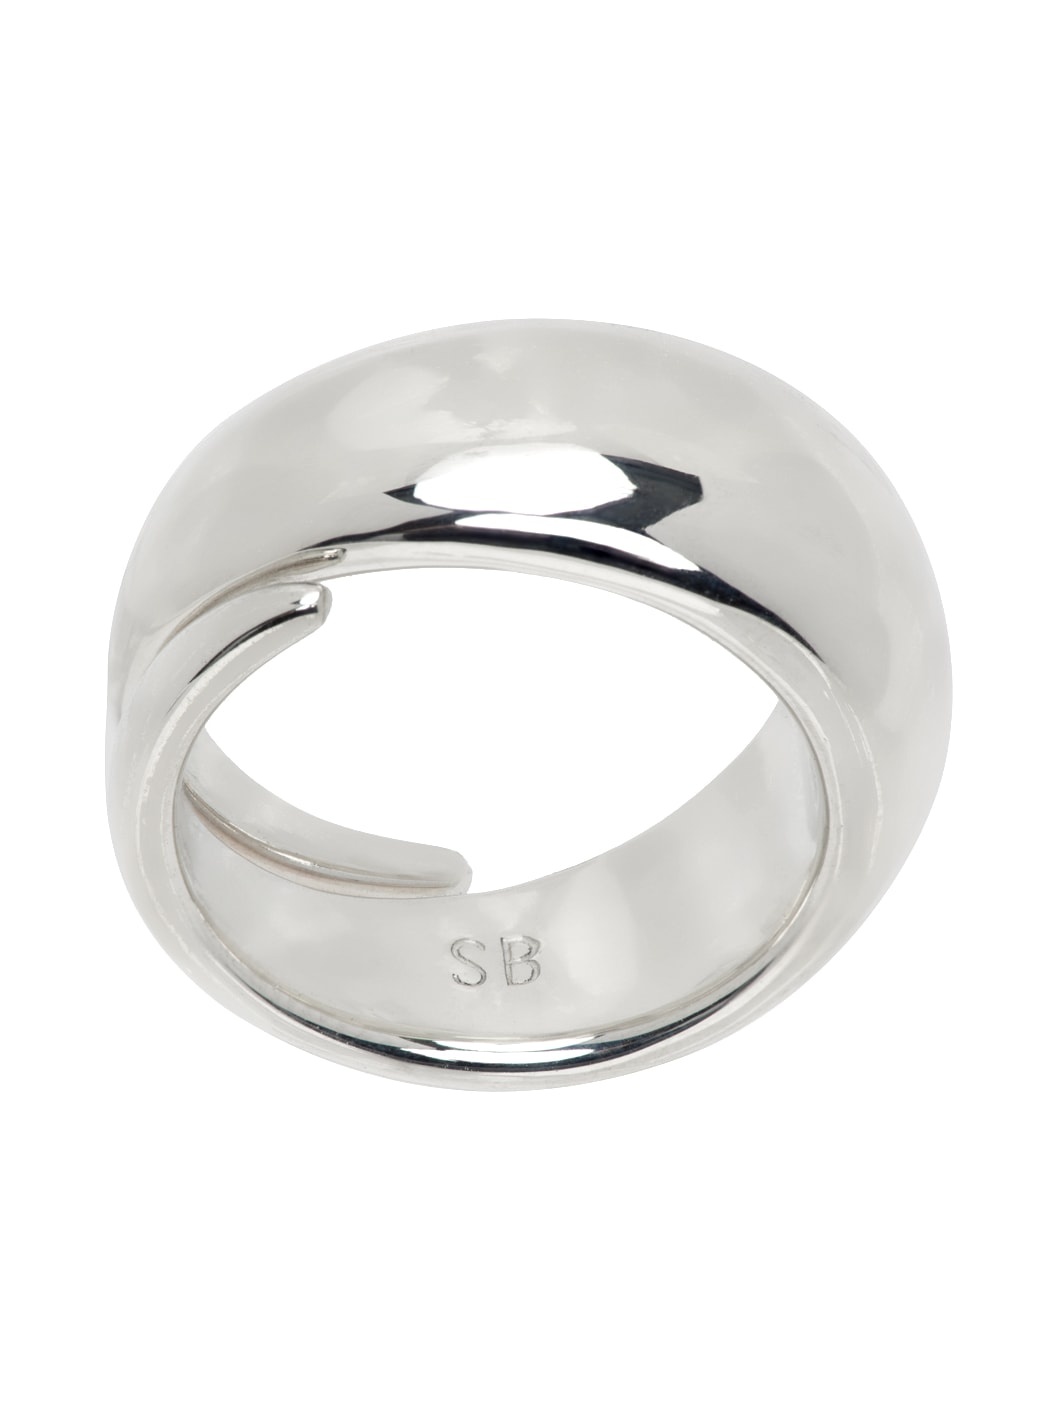 Silver Large Winding Ring - 1